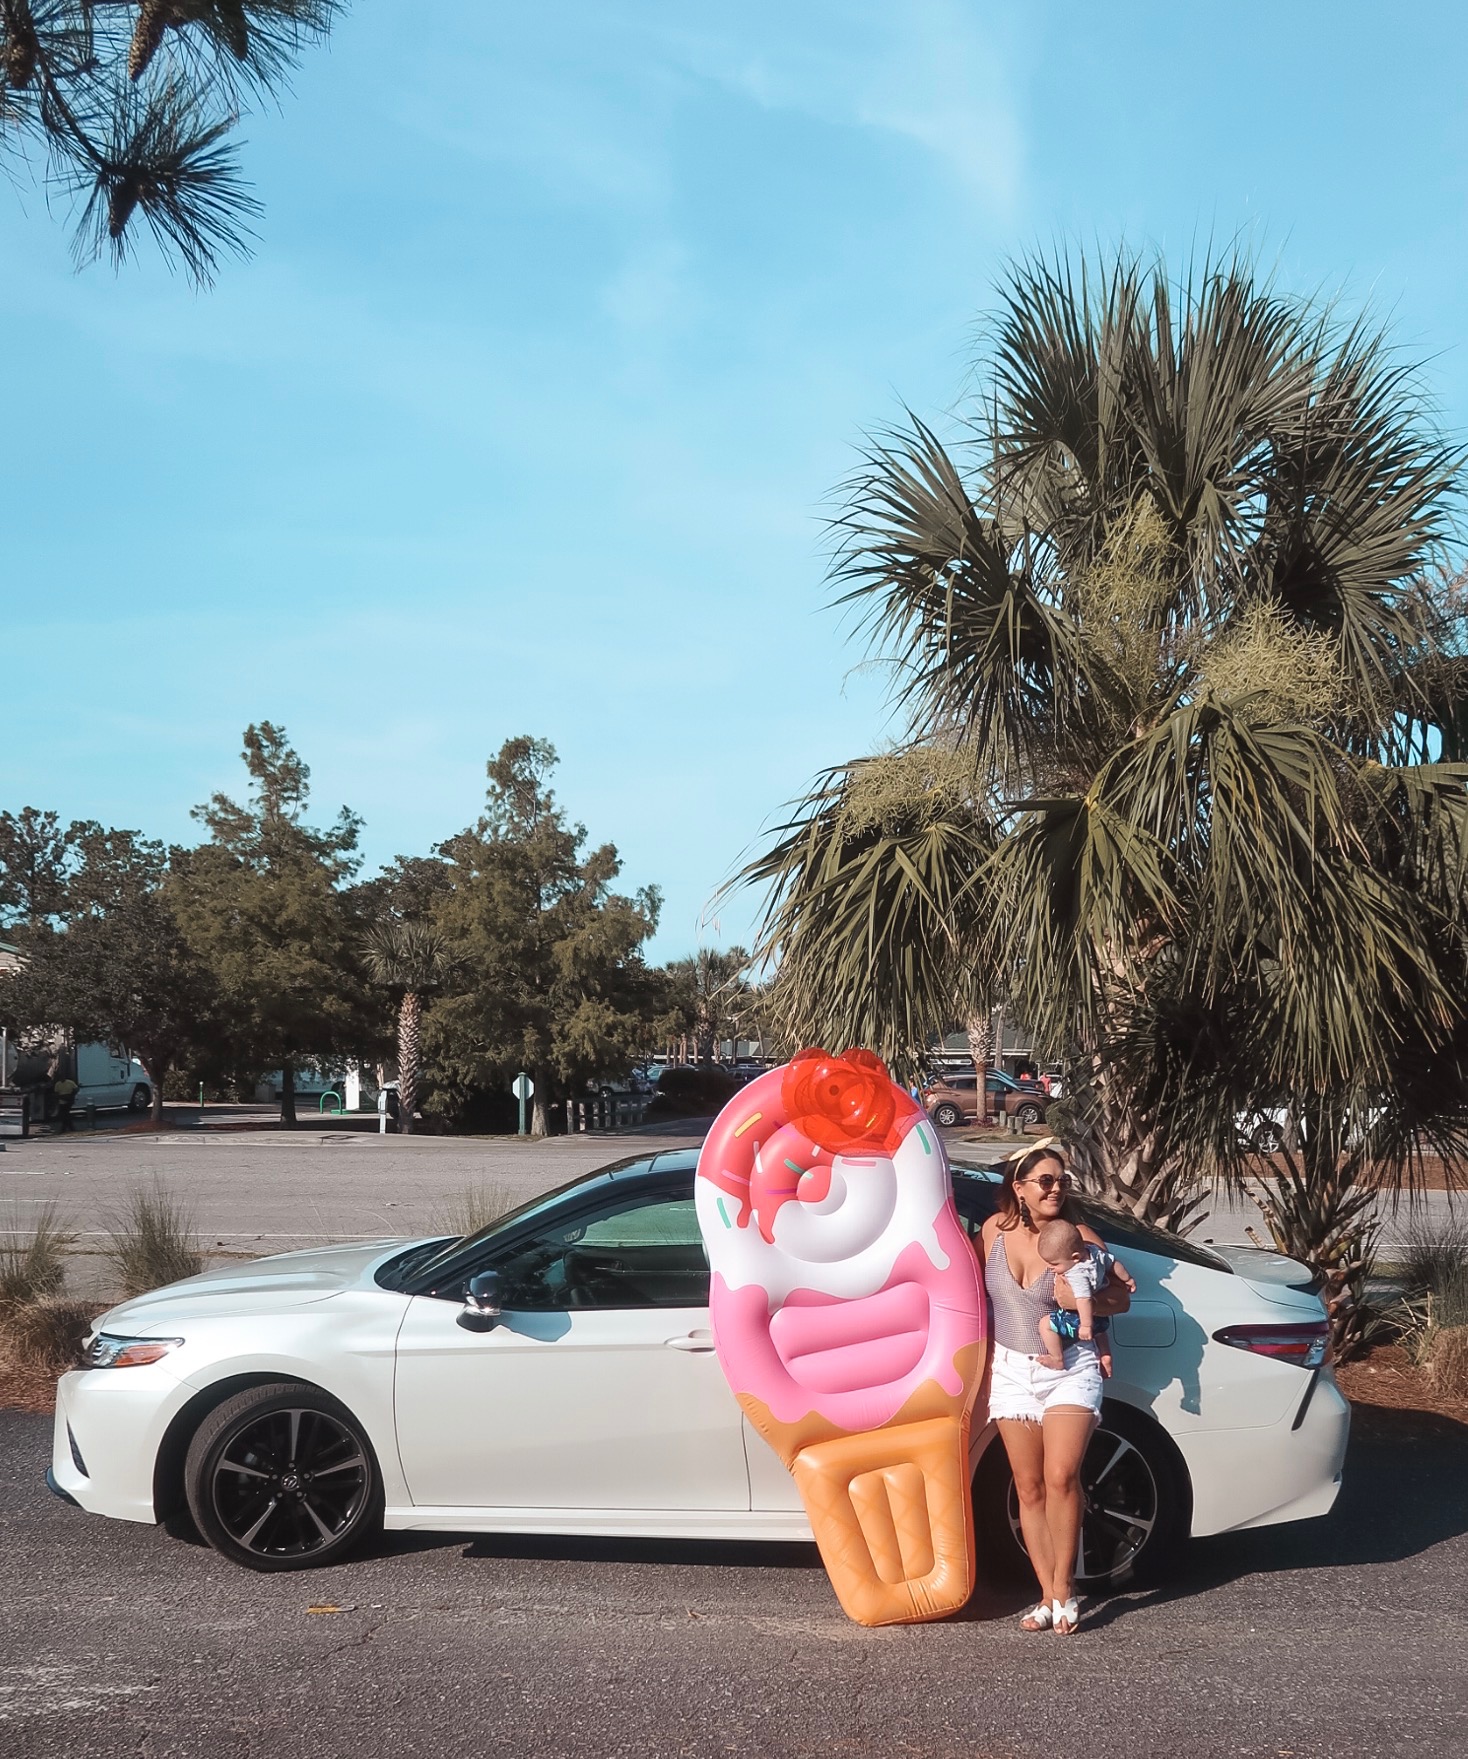 Family Road Trip to Hilton Head Island, SC from Atlanta with Toyota Camry | @maeamor